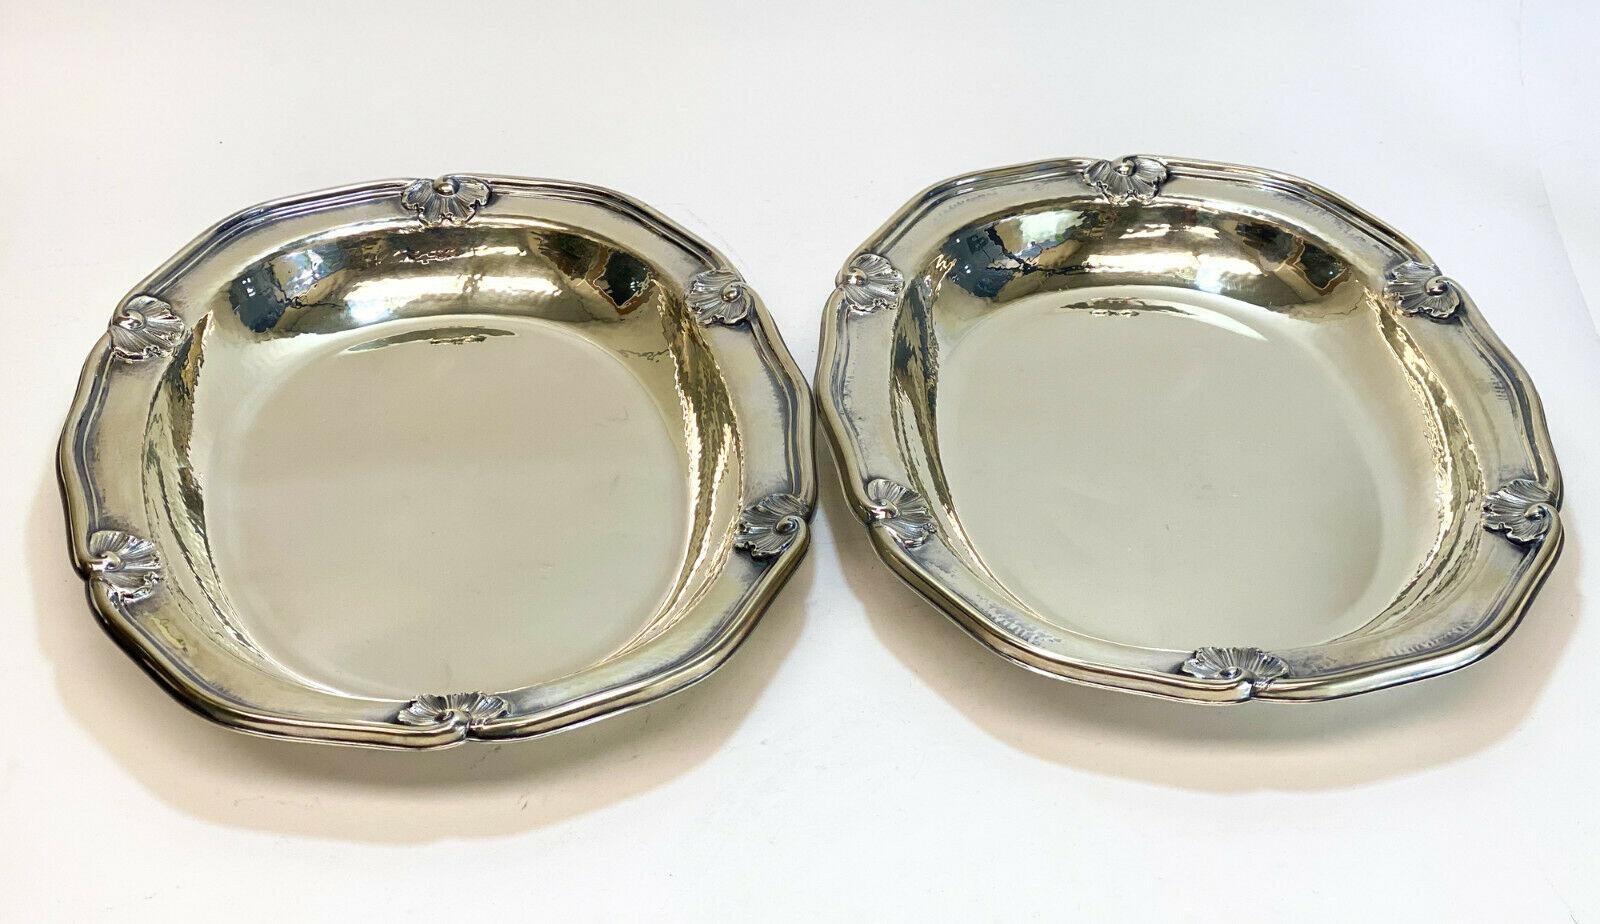 Pradella Ilario for Buccellati Italian sterling silver oval dishes. Scalloped rimmed with figural shells. Buccellati mark to the underside with the silversmith Pradella Ilario 

Weight approximate, 48 ozt

Measures: Approximate, 13.5 x 11.5 x